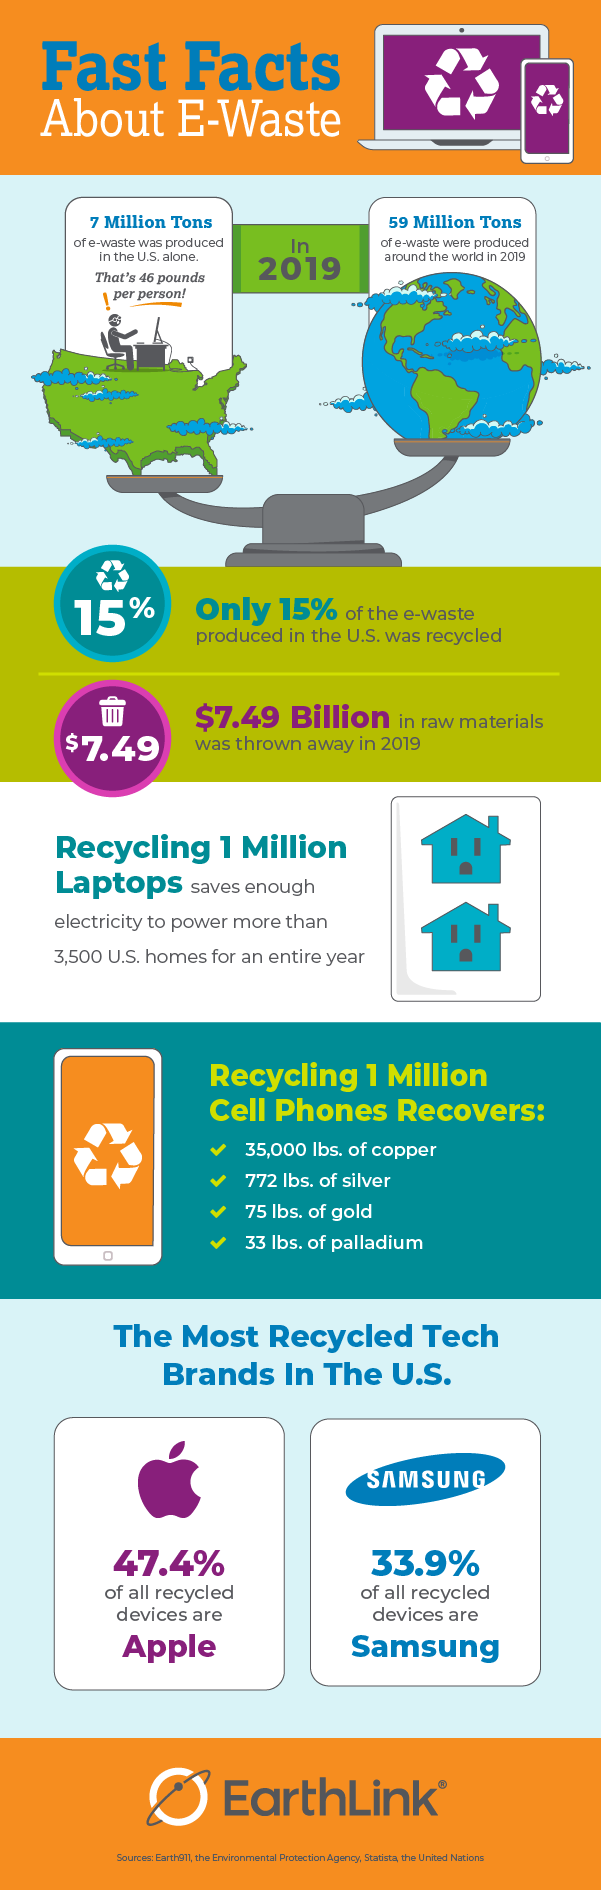 Infographic about e-waste: 59 million tons of e-waste were produced around the world in 2019; Roughly 7 million tons of e-waste was produced in the U.S. alone — that’s 46 pounds per person!; Only 15% of the e-waste produced in the U.S. was recycled; $7.49 billion in raw materials was thrown away in 2019; Recycling 1 million laptops saves enough electricity to power more than 3,500 U.S. homes for an entire year; Recycling 1 million cell phones recovers: 35,000 lbs. of copper; 772 lbs. Of silver; 75 lbs. Of gold; 33 lbs. of palladium; Apple is the most recycled tech brand in the U.S., accounting for 47.4% of all recycled devices; Samsung is the second-most recycled tech brand in the U.S., accounting for 33.9% 